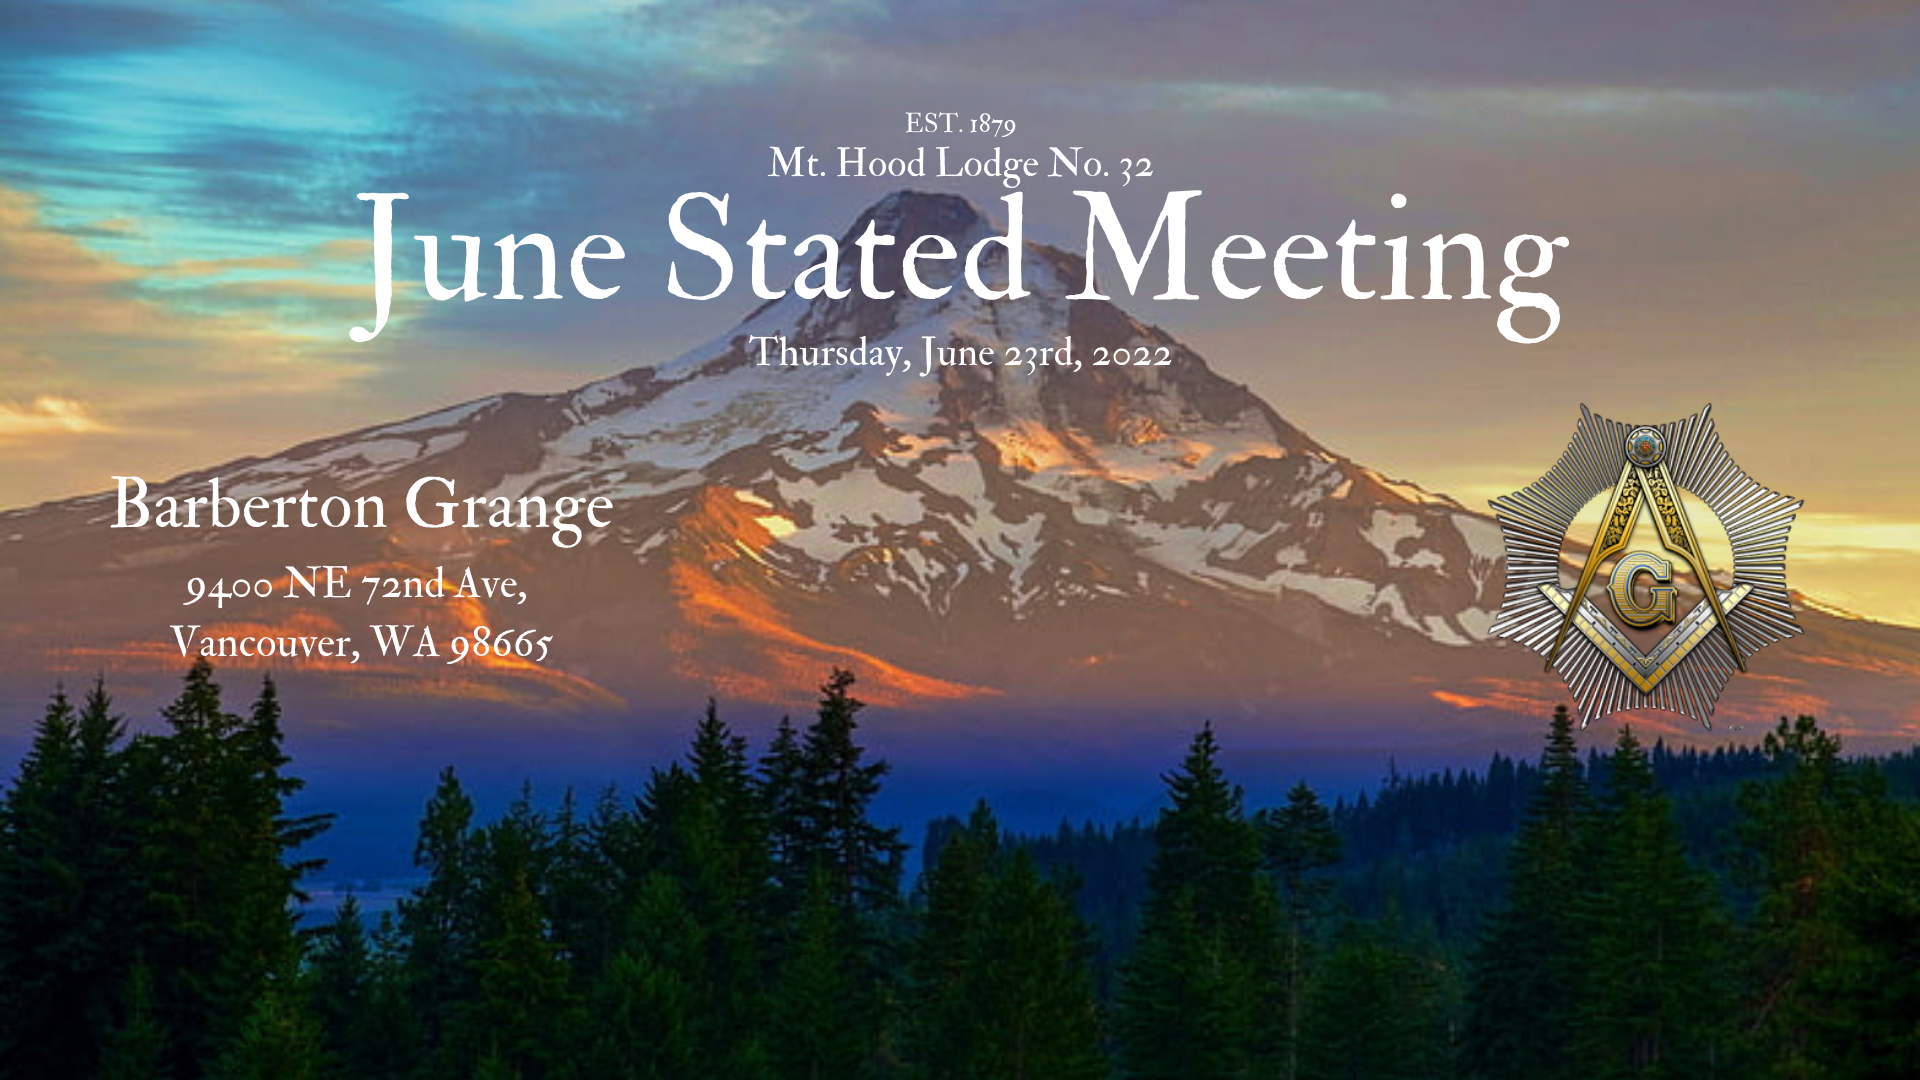 Stated Meeting – June 23rd, 2022